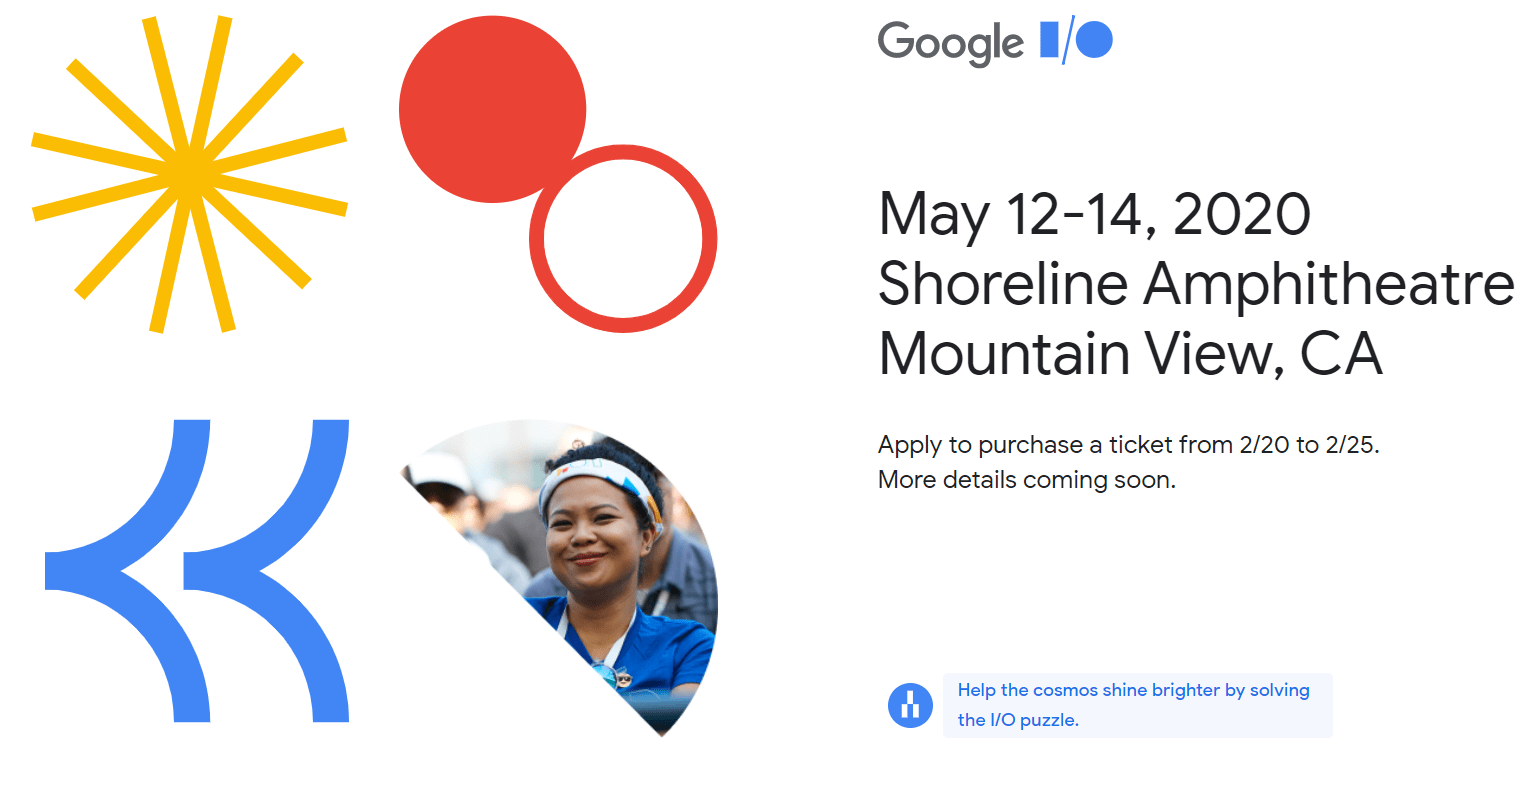 Google I/O 2020 Dates and What to expect?